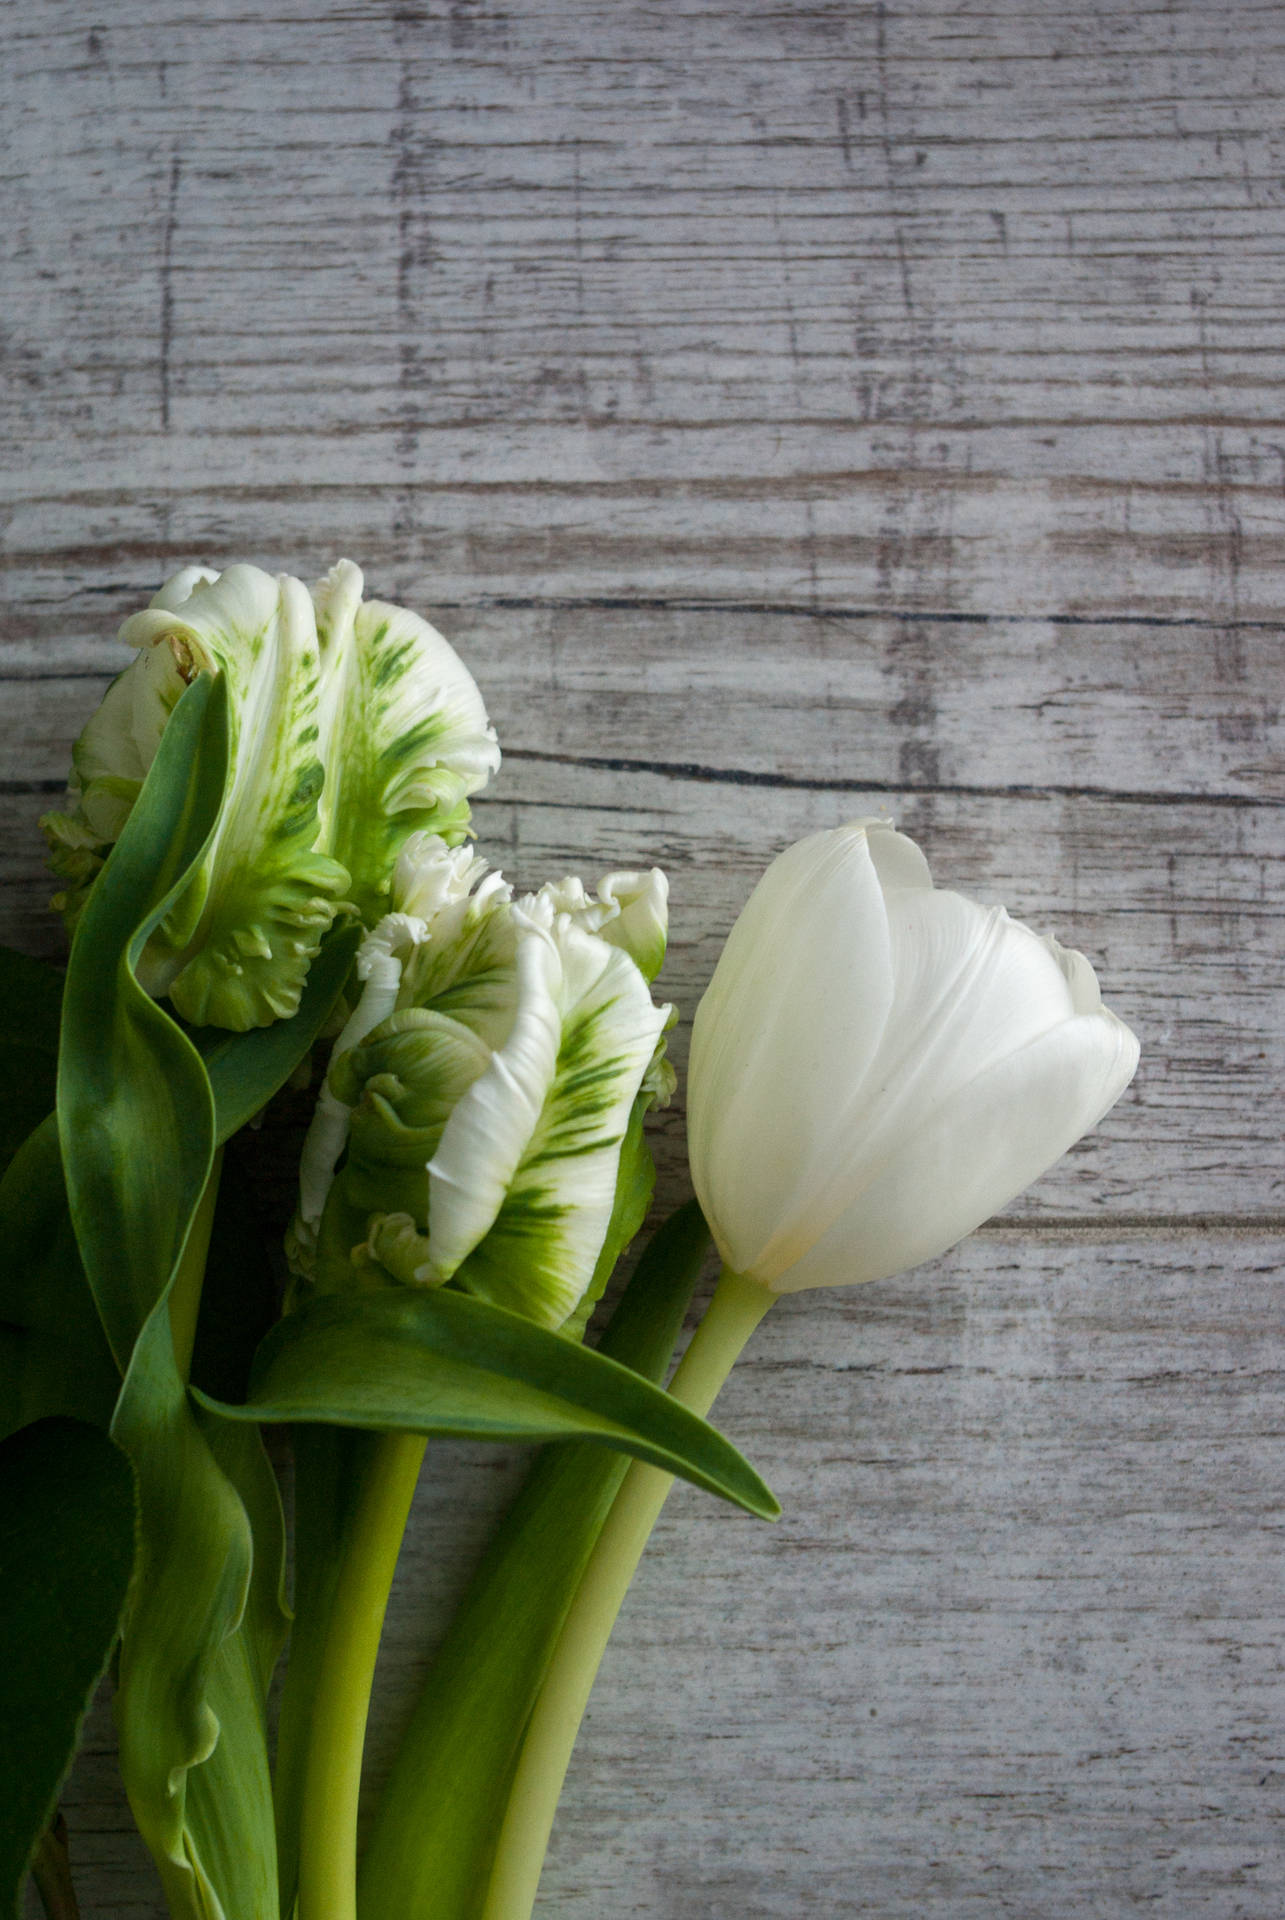 Enjoy The Beauty Of Nature With These White Tulips In A Lush Green Aesthetic.